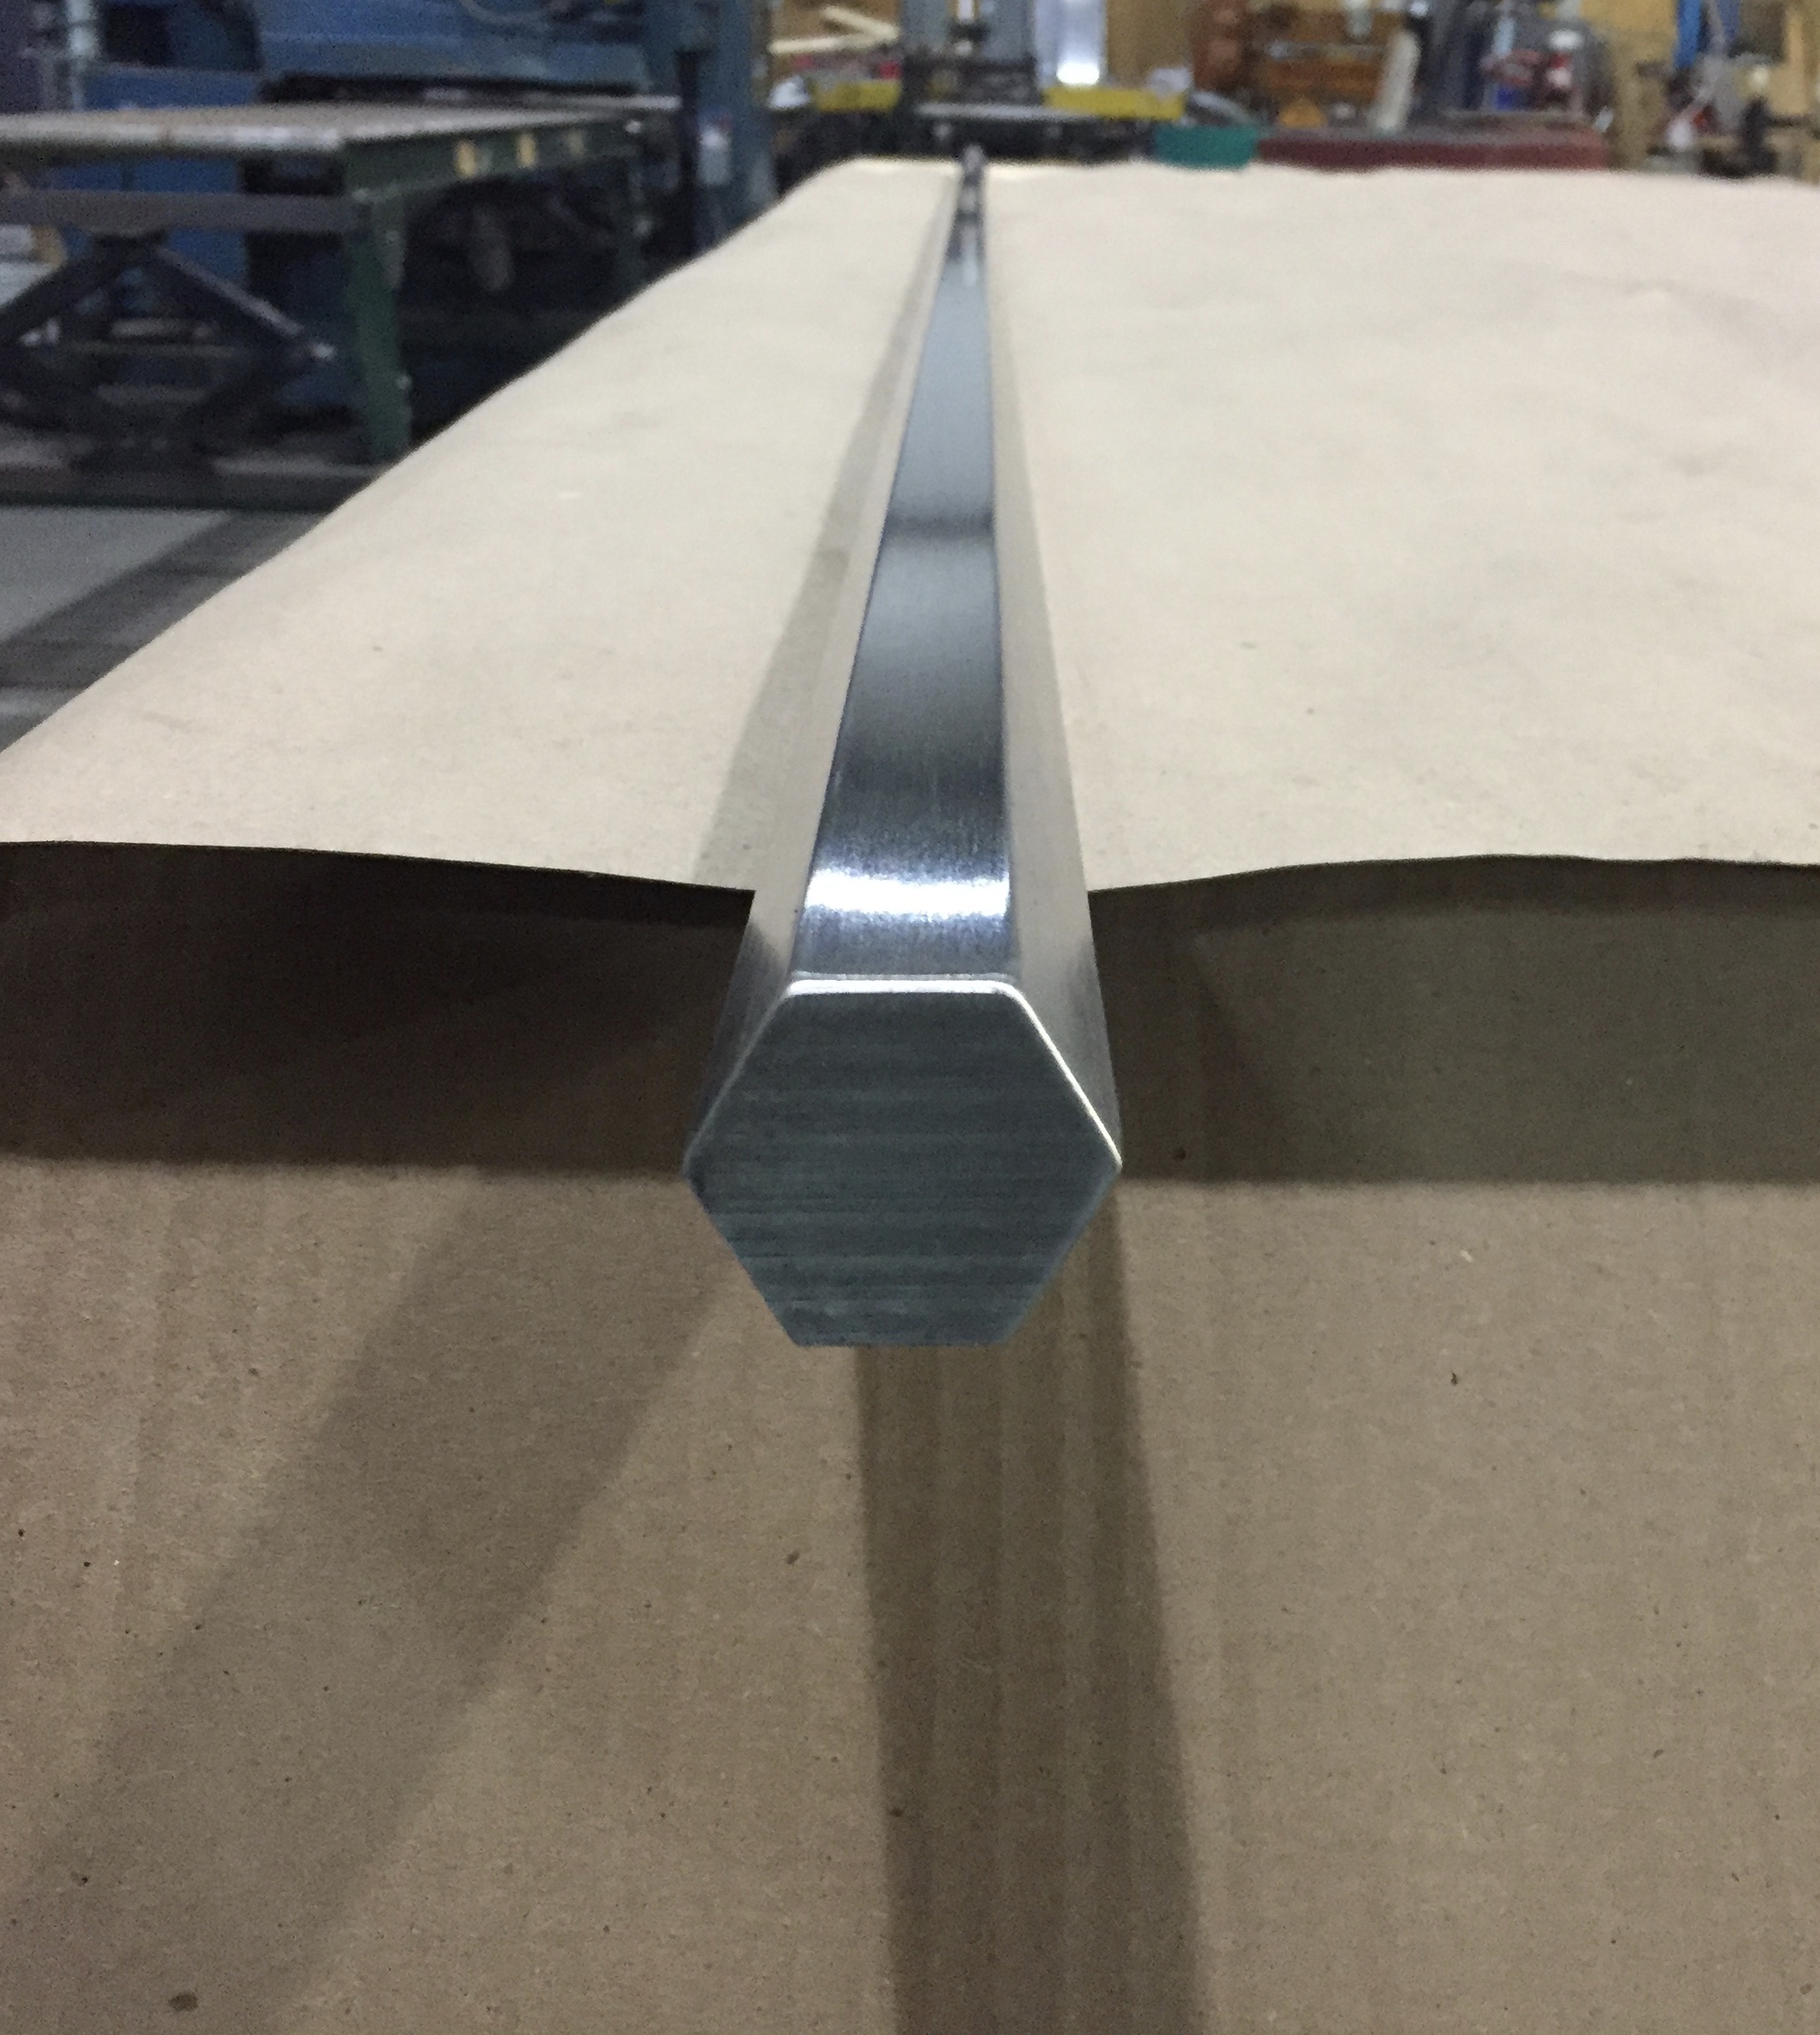 Polishes stainless steel bar